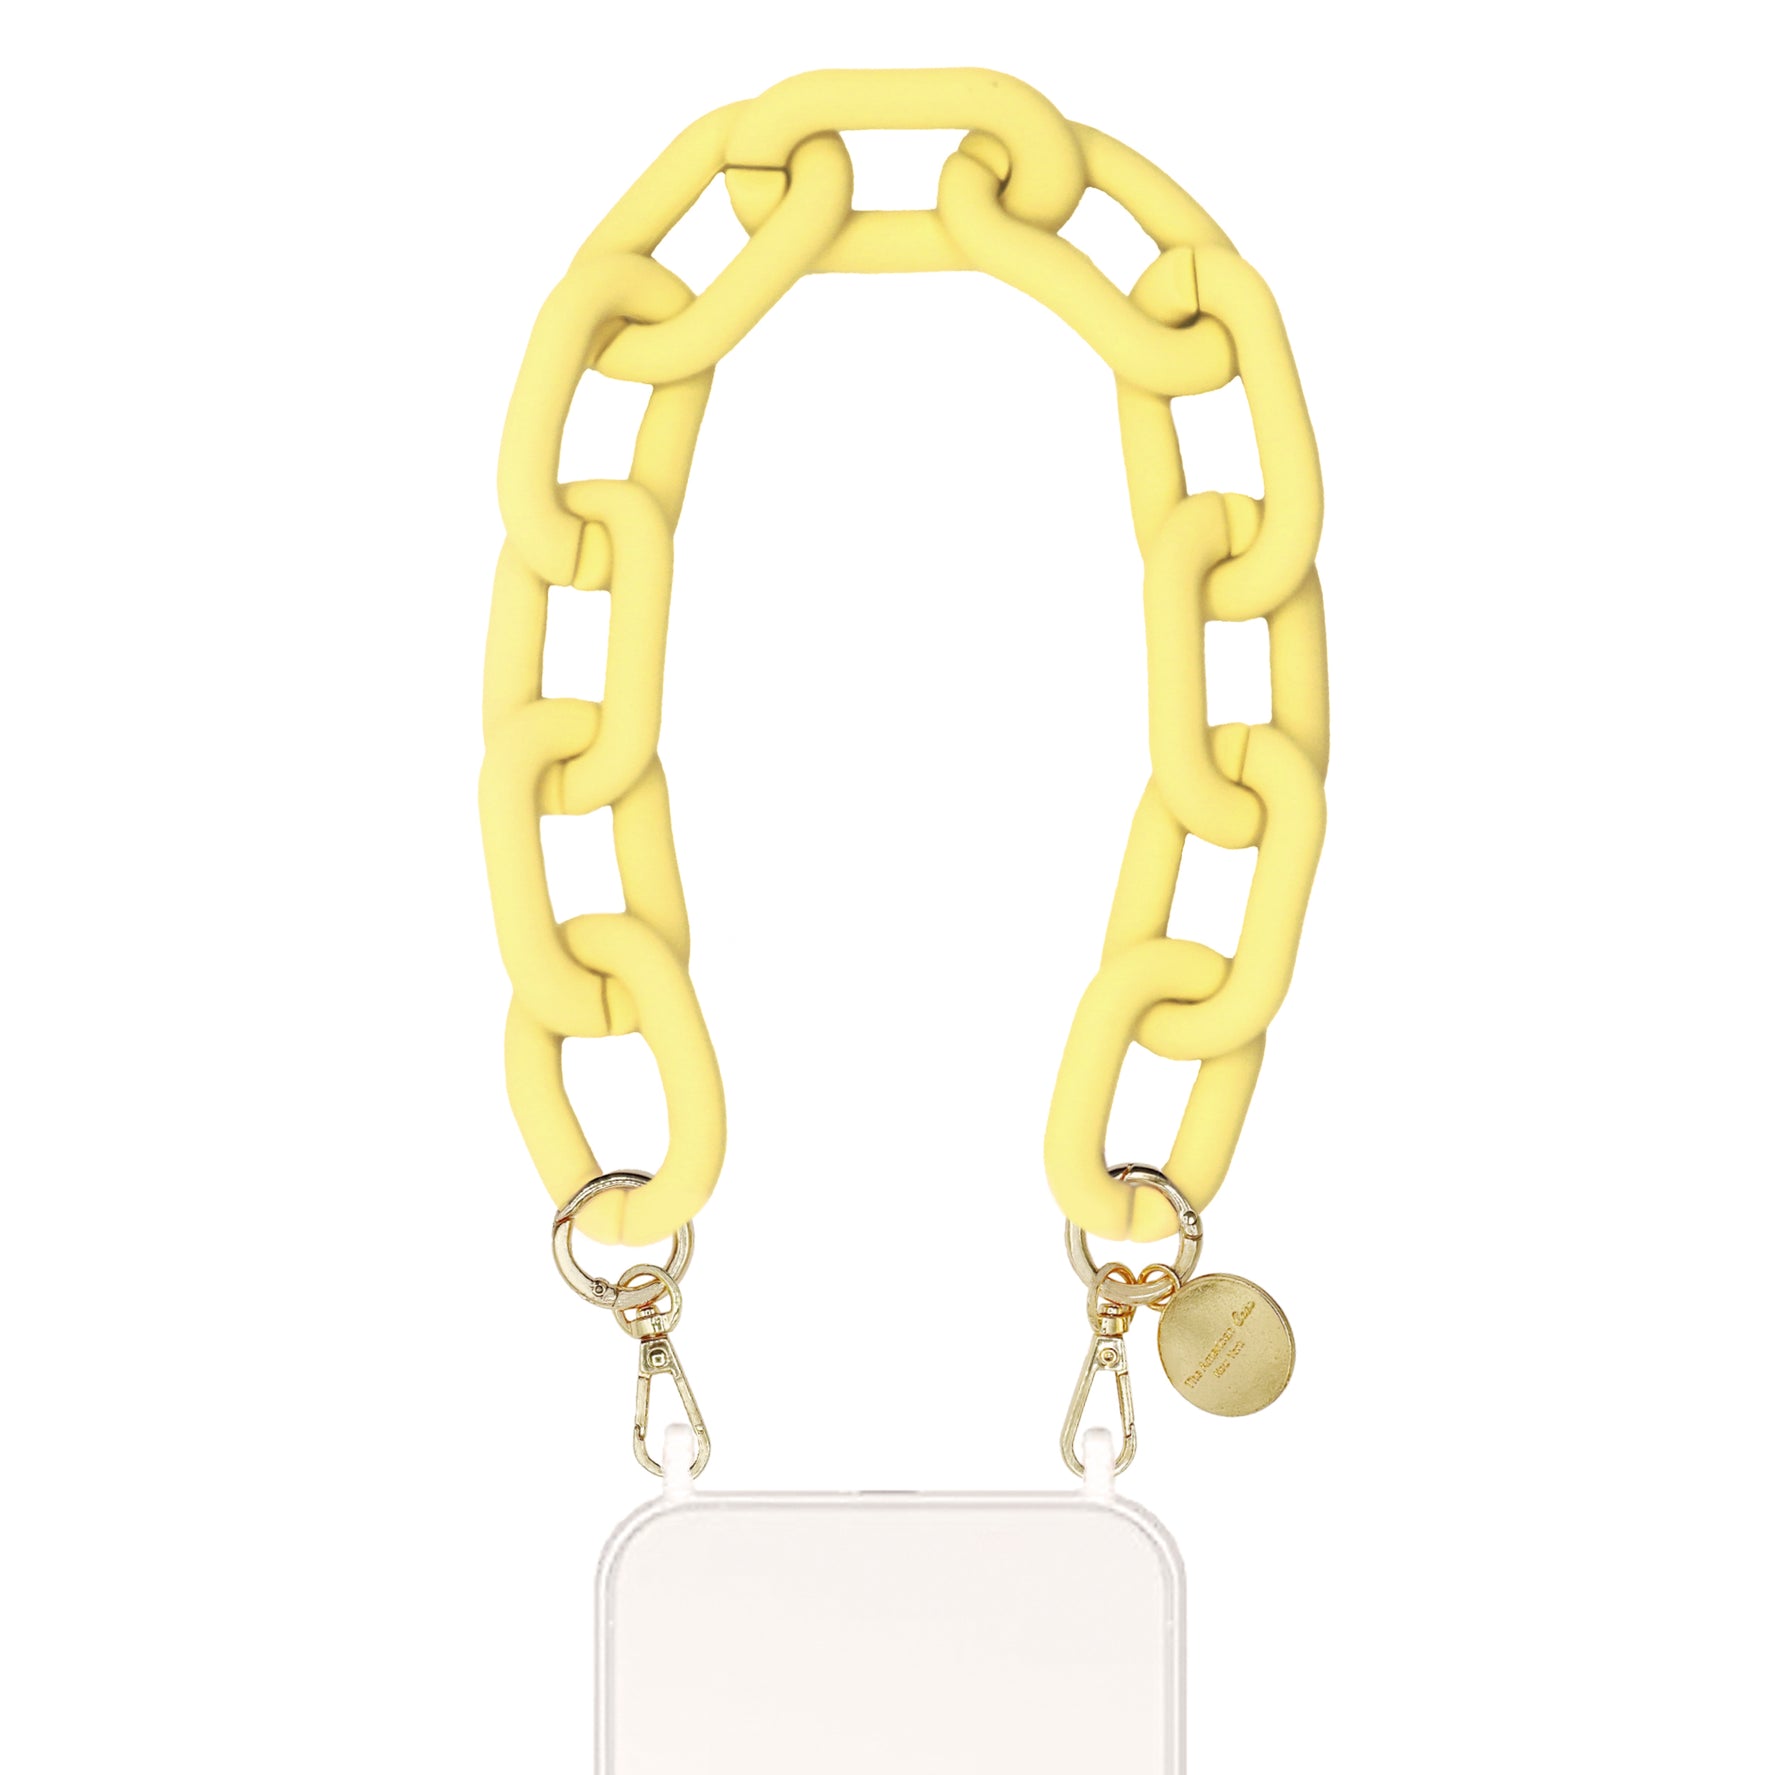 Nora - Pastel Color Resin Link Bracelet Phone Chain With Golden Carabiners